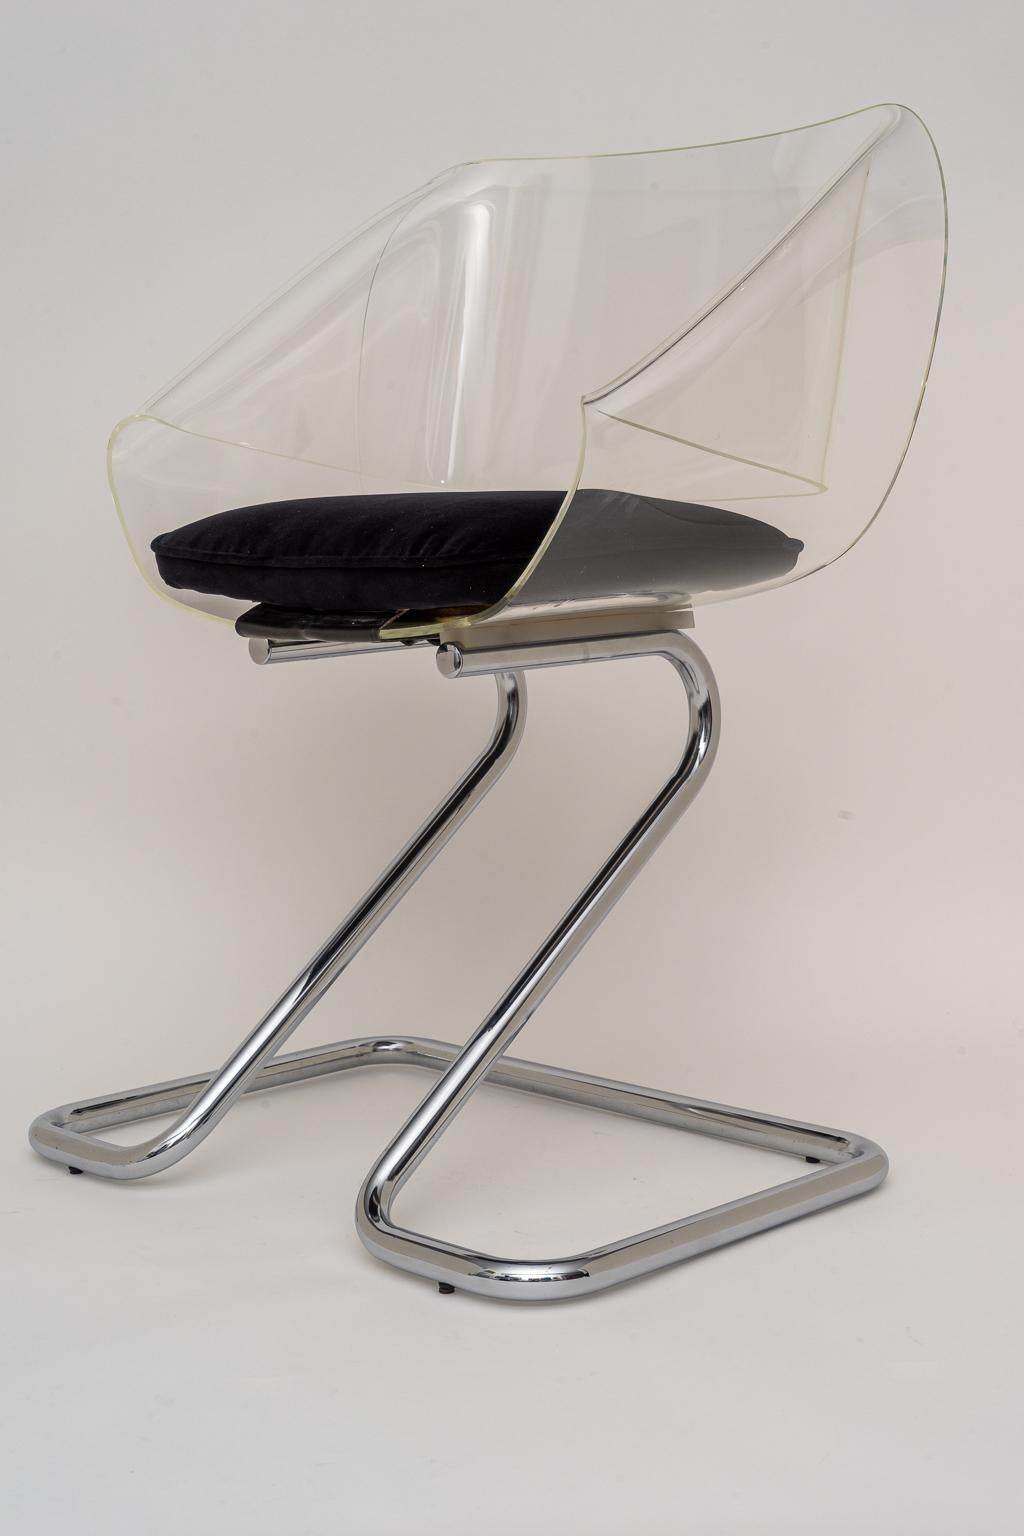 This stylish 1970s arm chairs if very much in the hip style of pieces created by Pierre Cardin. The scale is perfect for a desk or vanity chair and of course as a pull up chair for any room.

Note: The lucite has been professionally polished